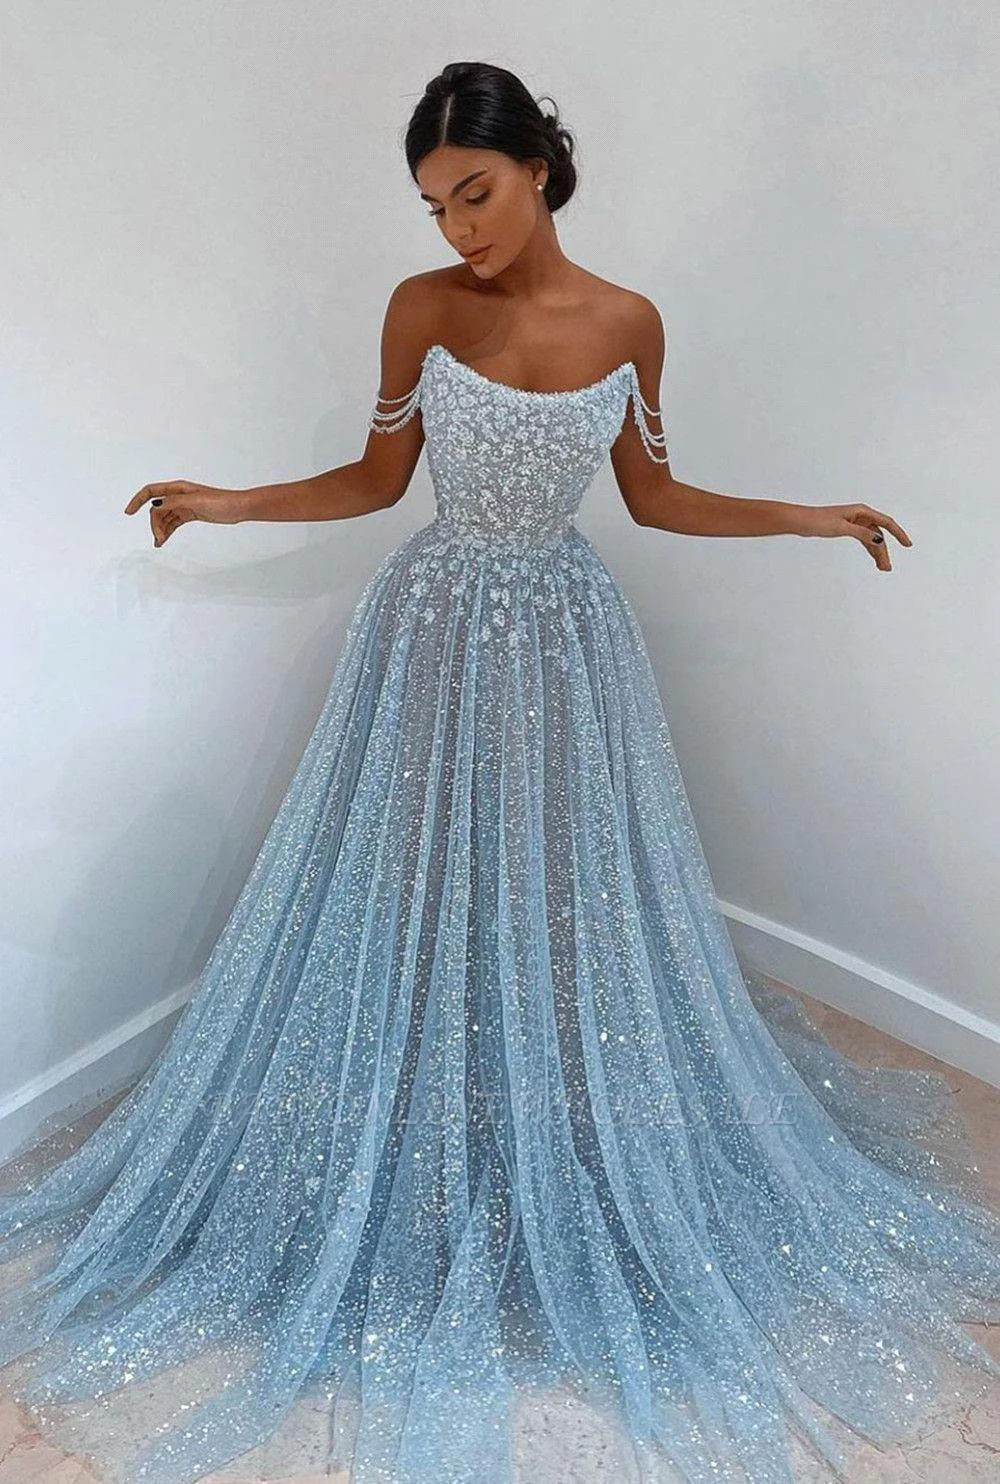 

Women Sparkly Sequined Elegant Evening Dress A Line Strapless Formal Occasion Wedding Party Prom Gown For Bride Vestido De Noiva